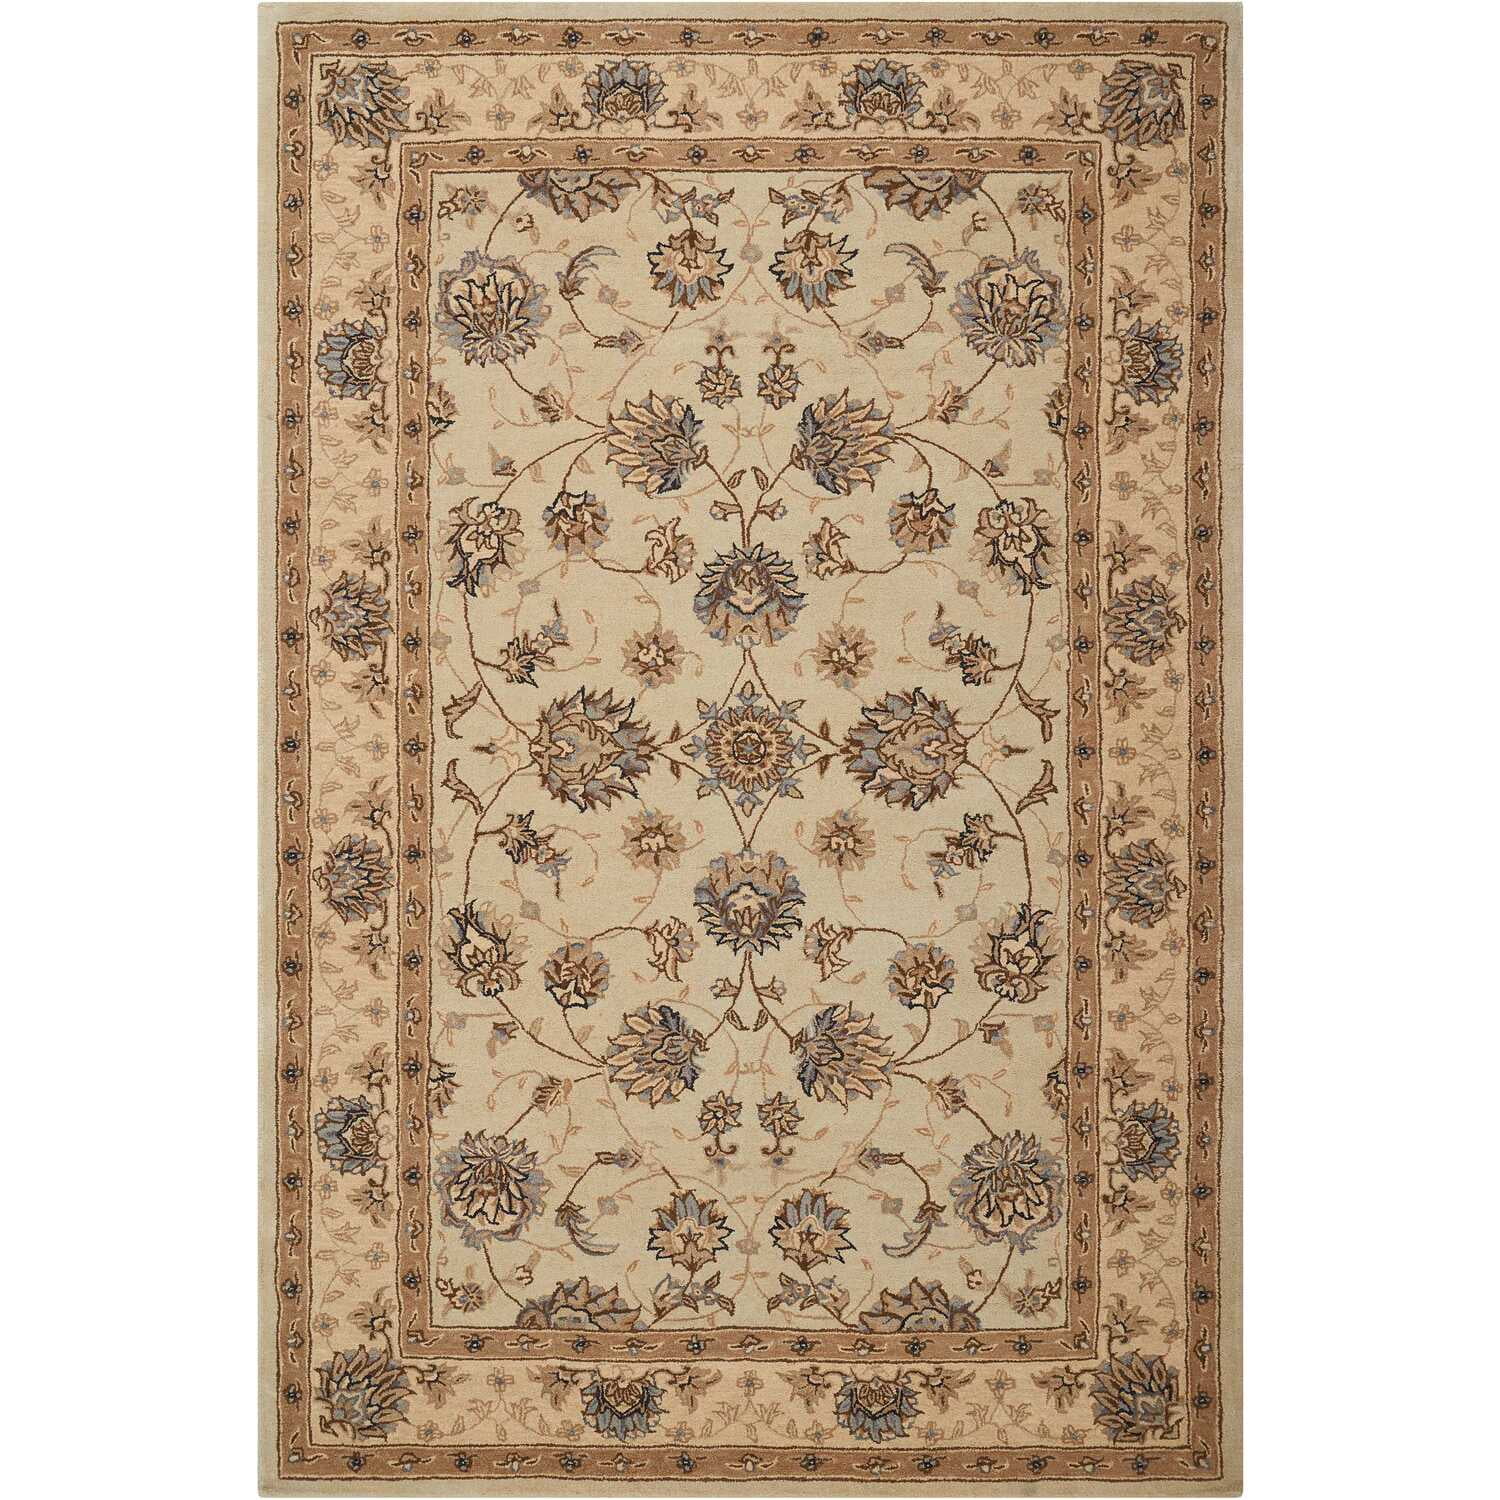 8-Feet 6-Inches by 11-Feet 6-Inches Nourison Heritage Hall Black Rectangle Area Rug 8'6 x 11'6